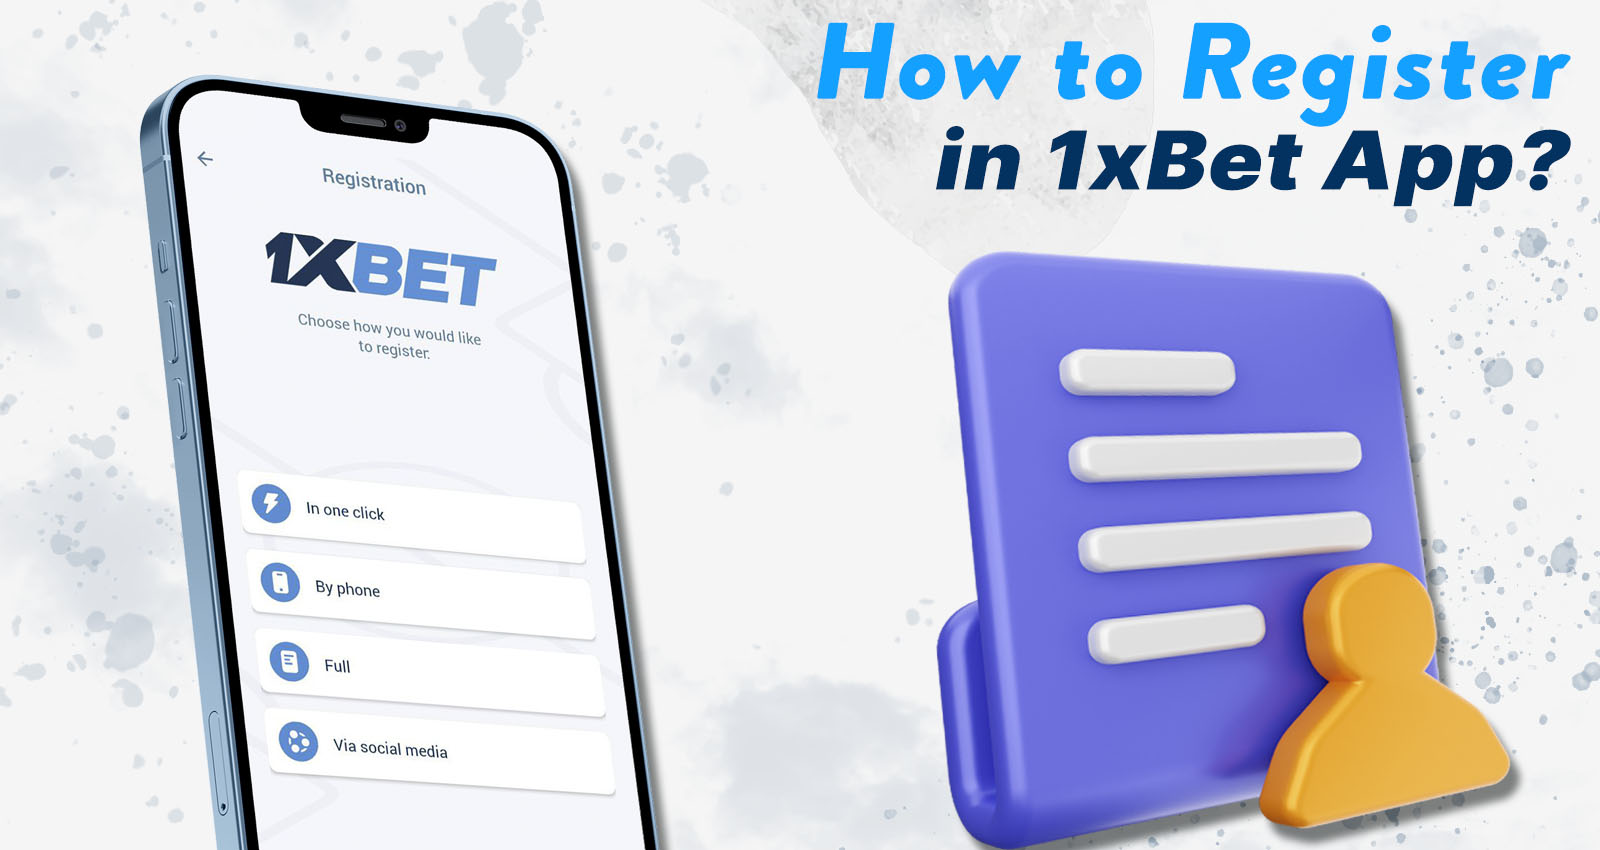 Registering a 1xBet account in Bangladesh